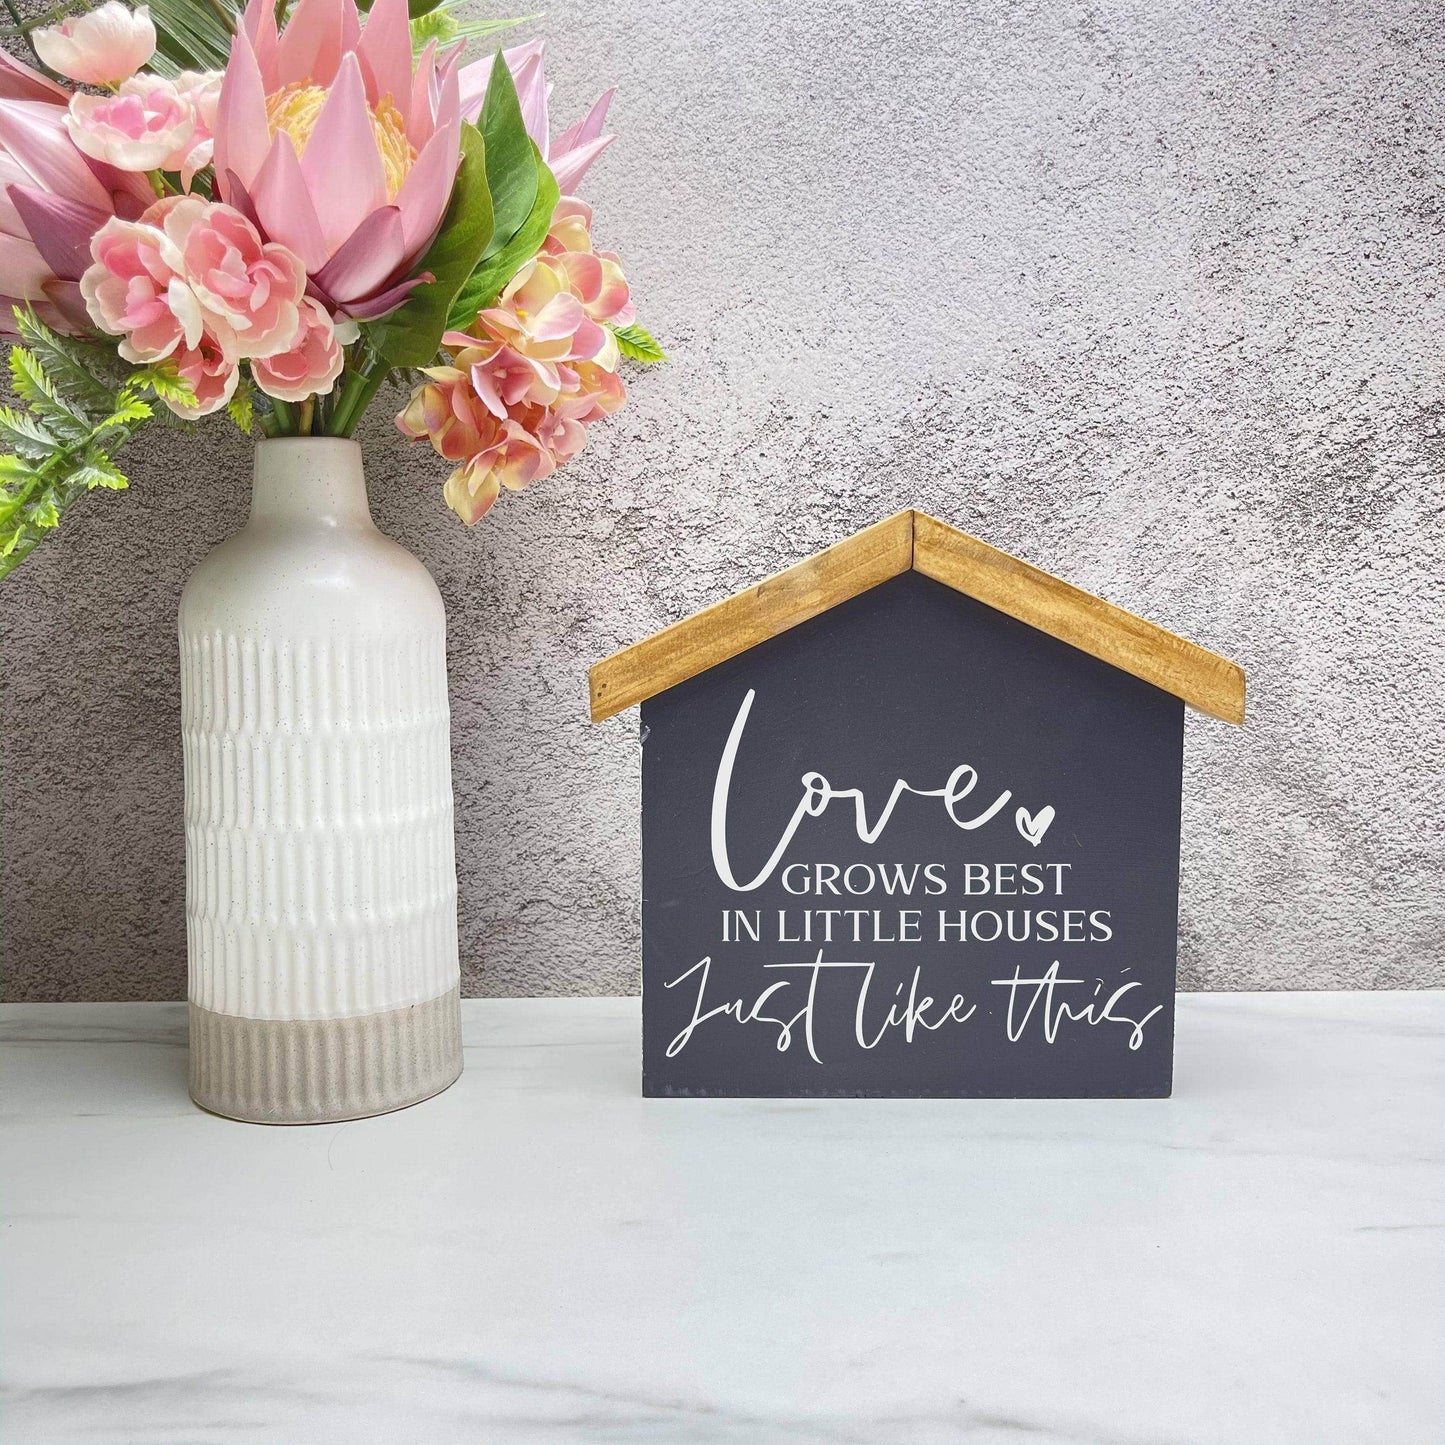 Love grows best in little houses House wood sign, farmhouse sign, rustic decor, home decor